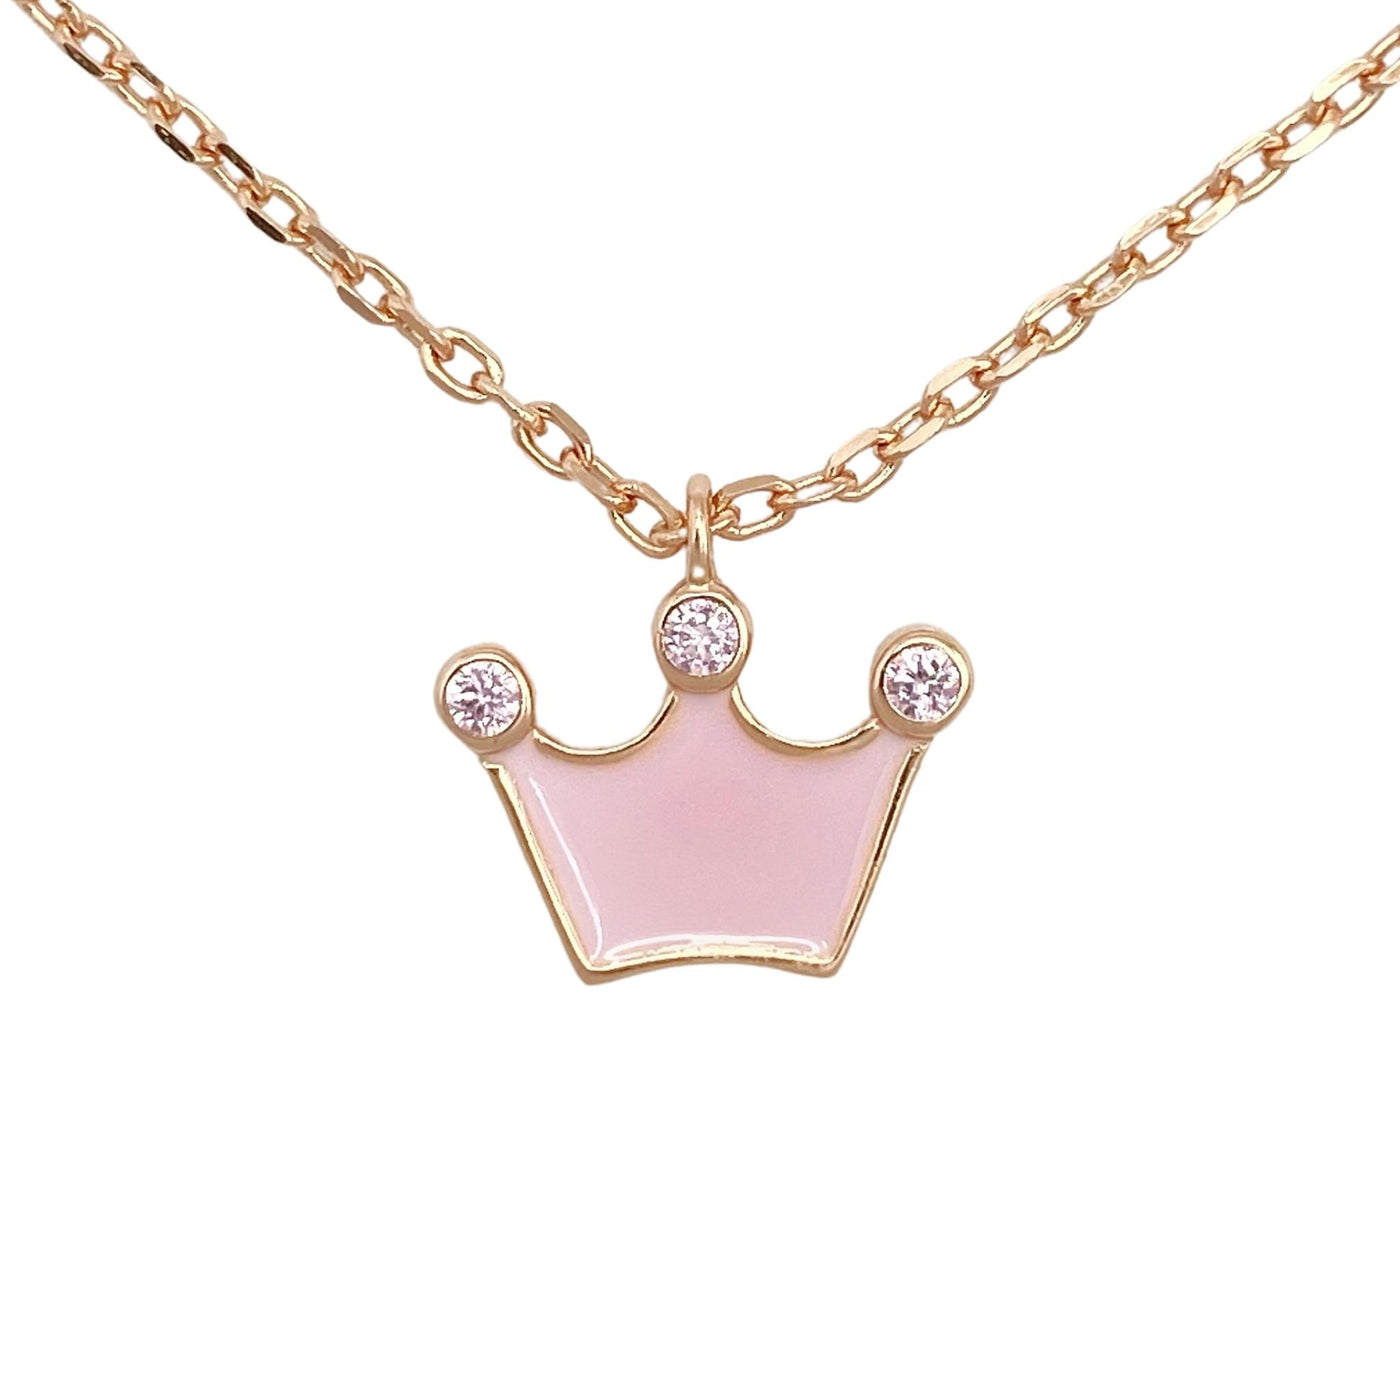 Silver necklace with enamel crown charm